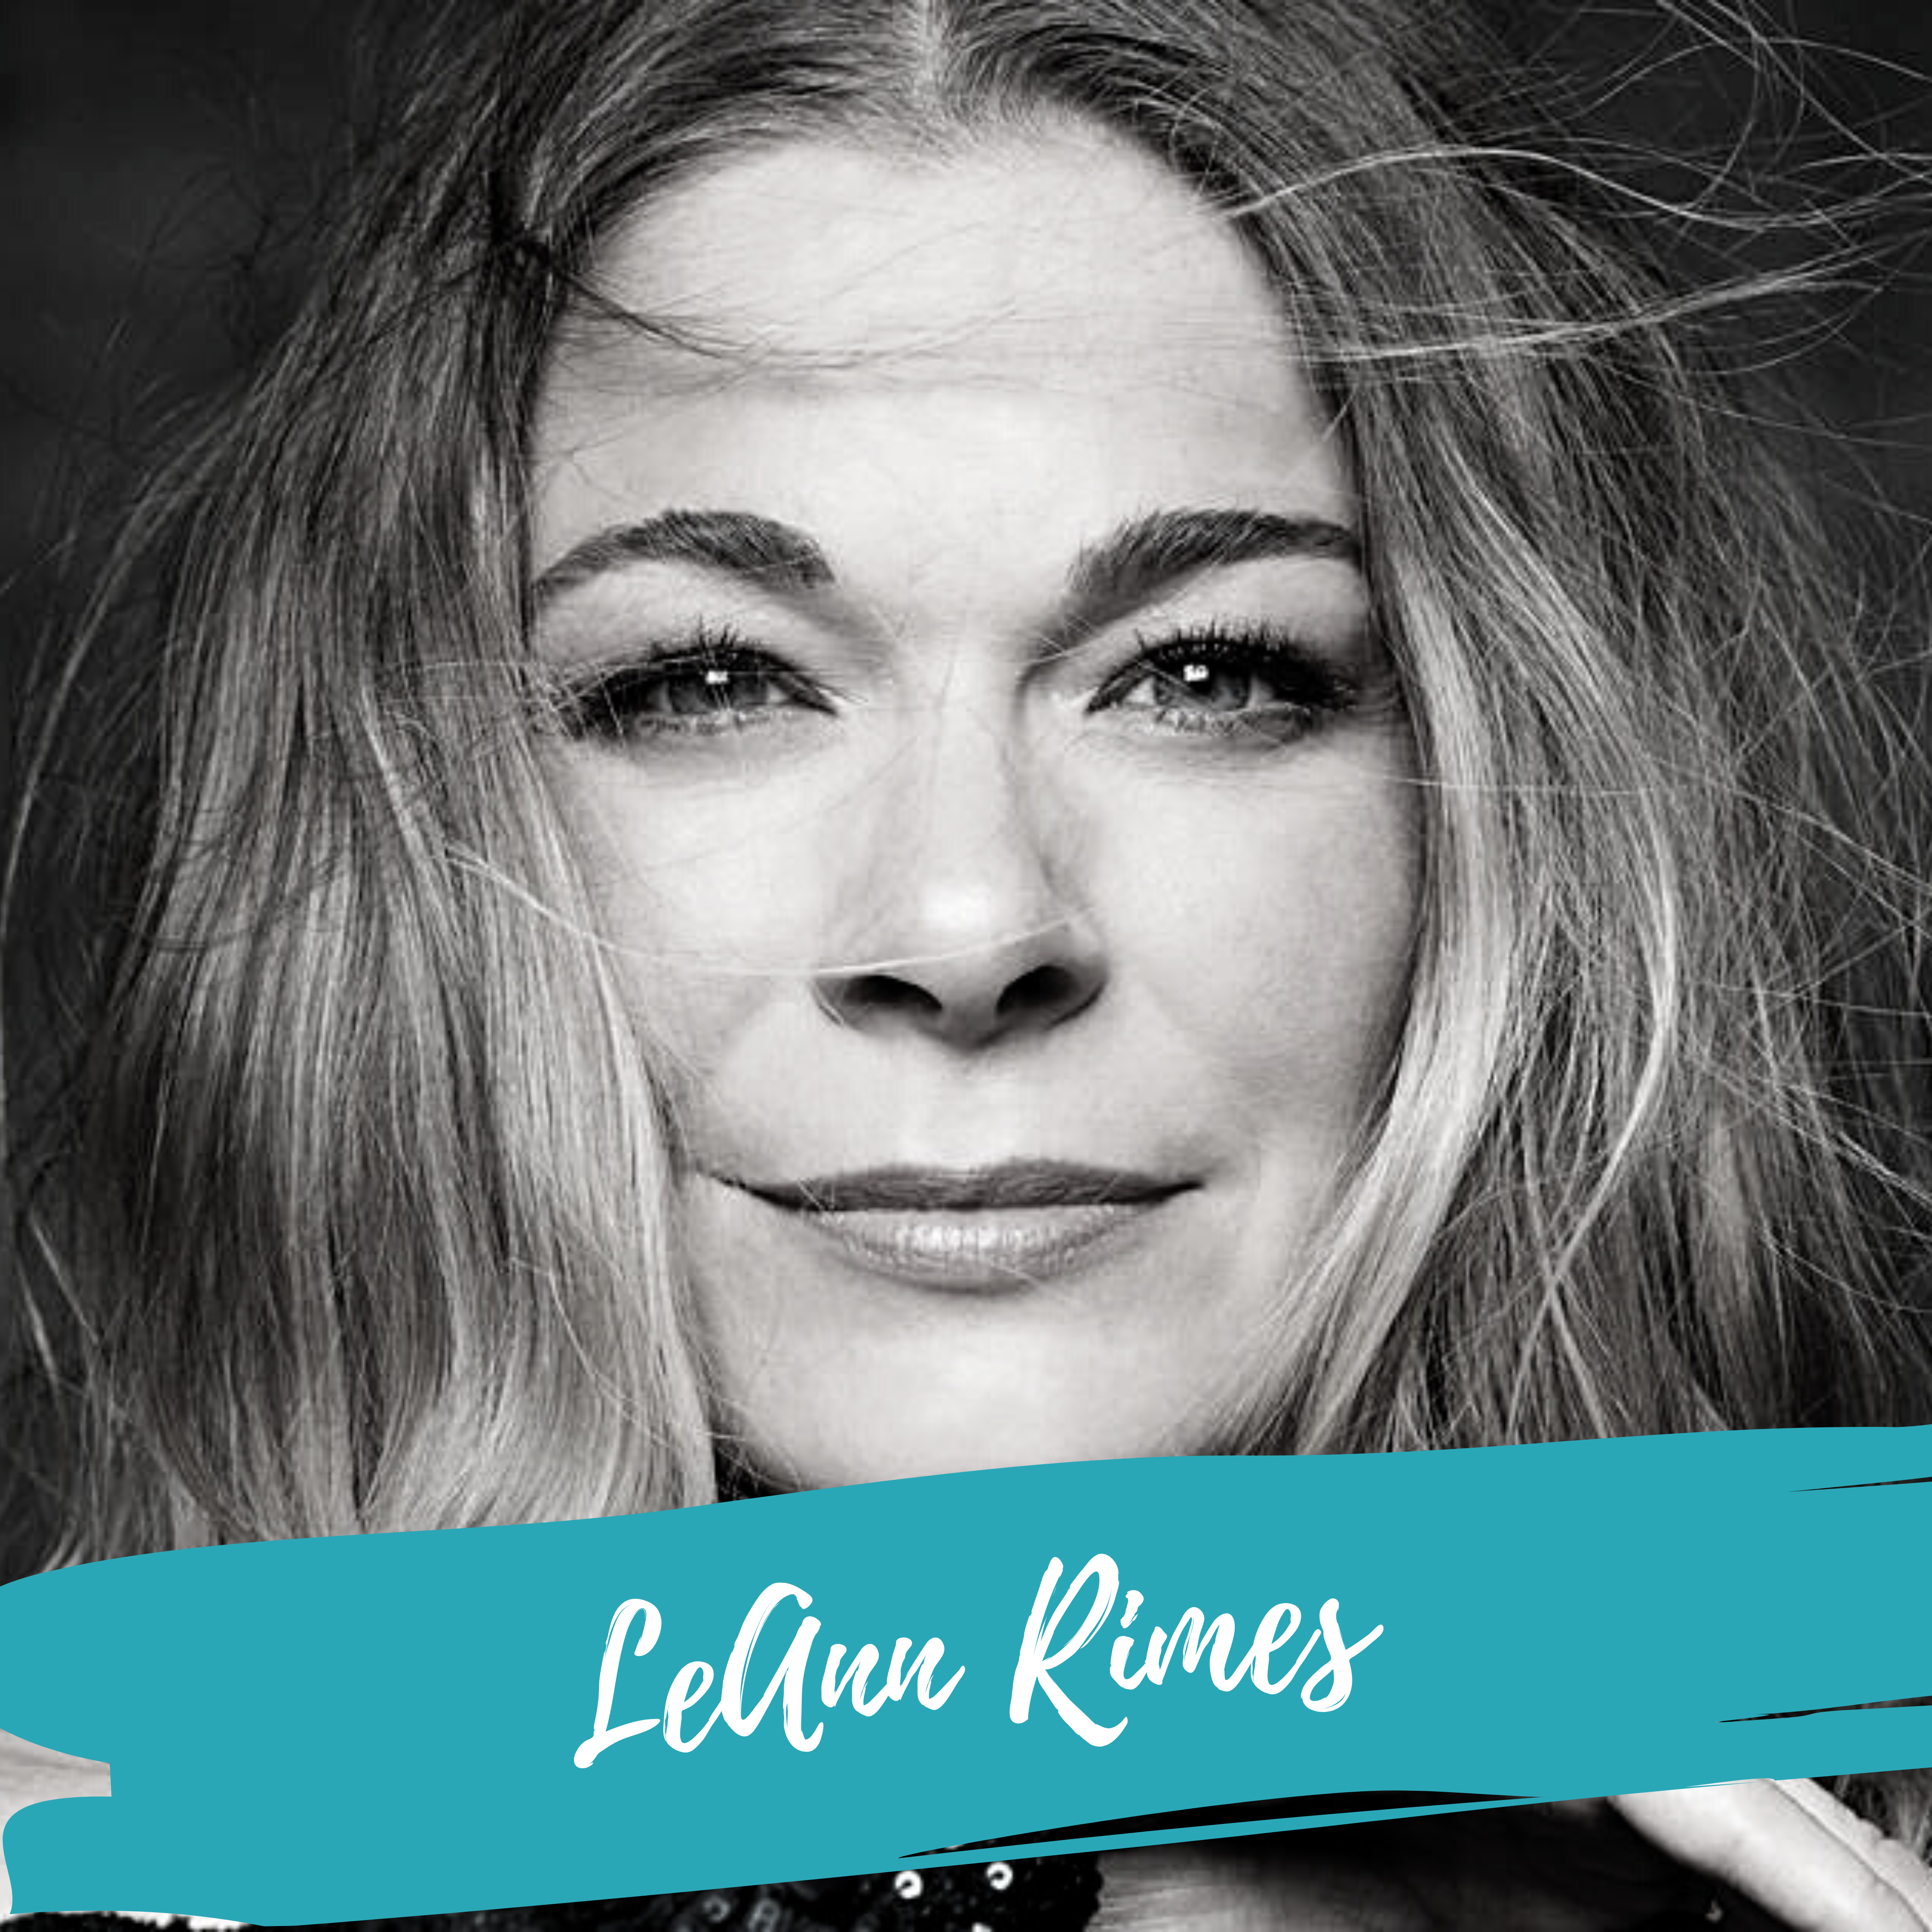 LeAnn Rimes’ Health Journey: From Toxicity to Hormone Balance